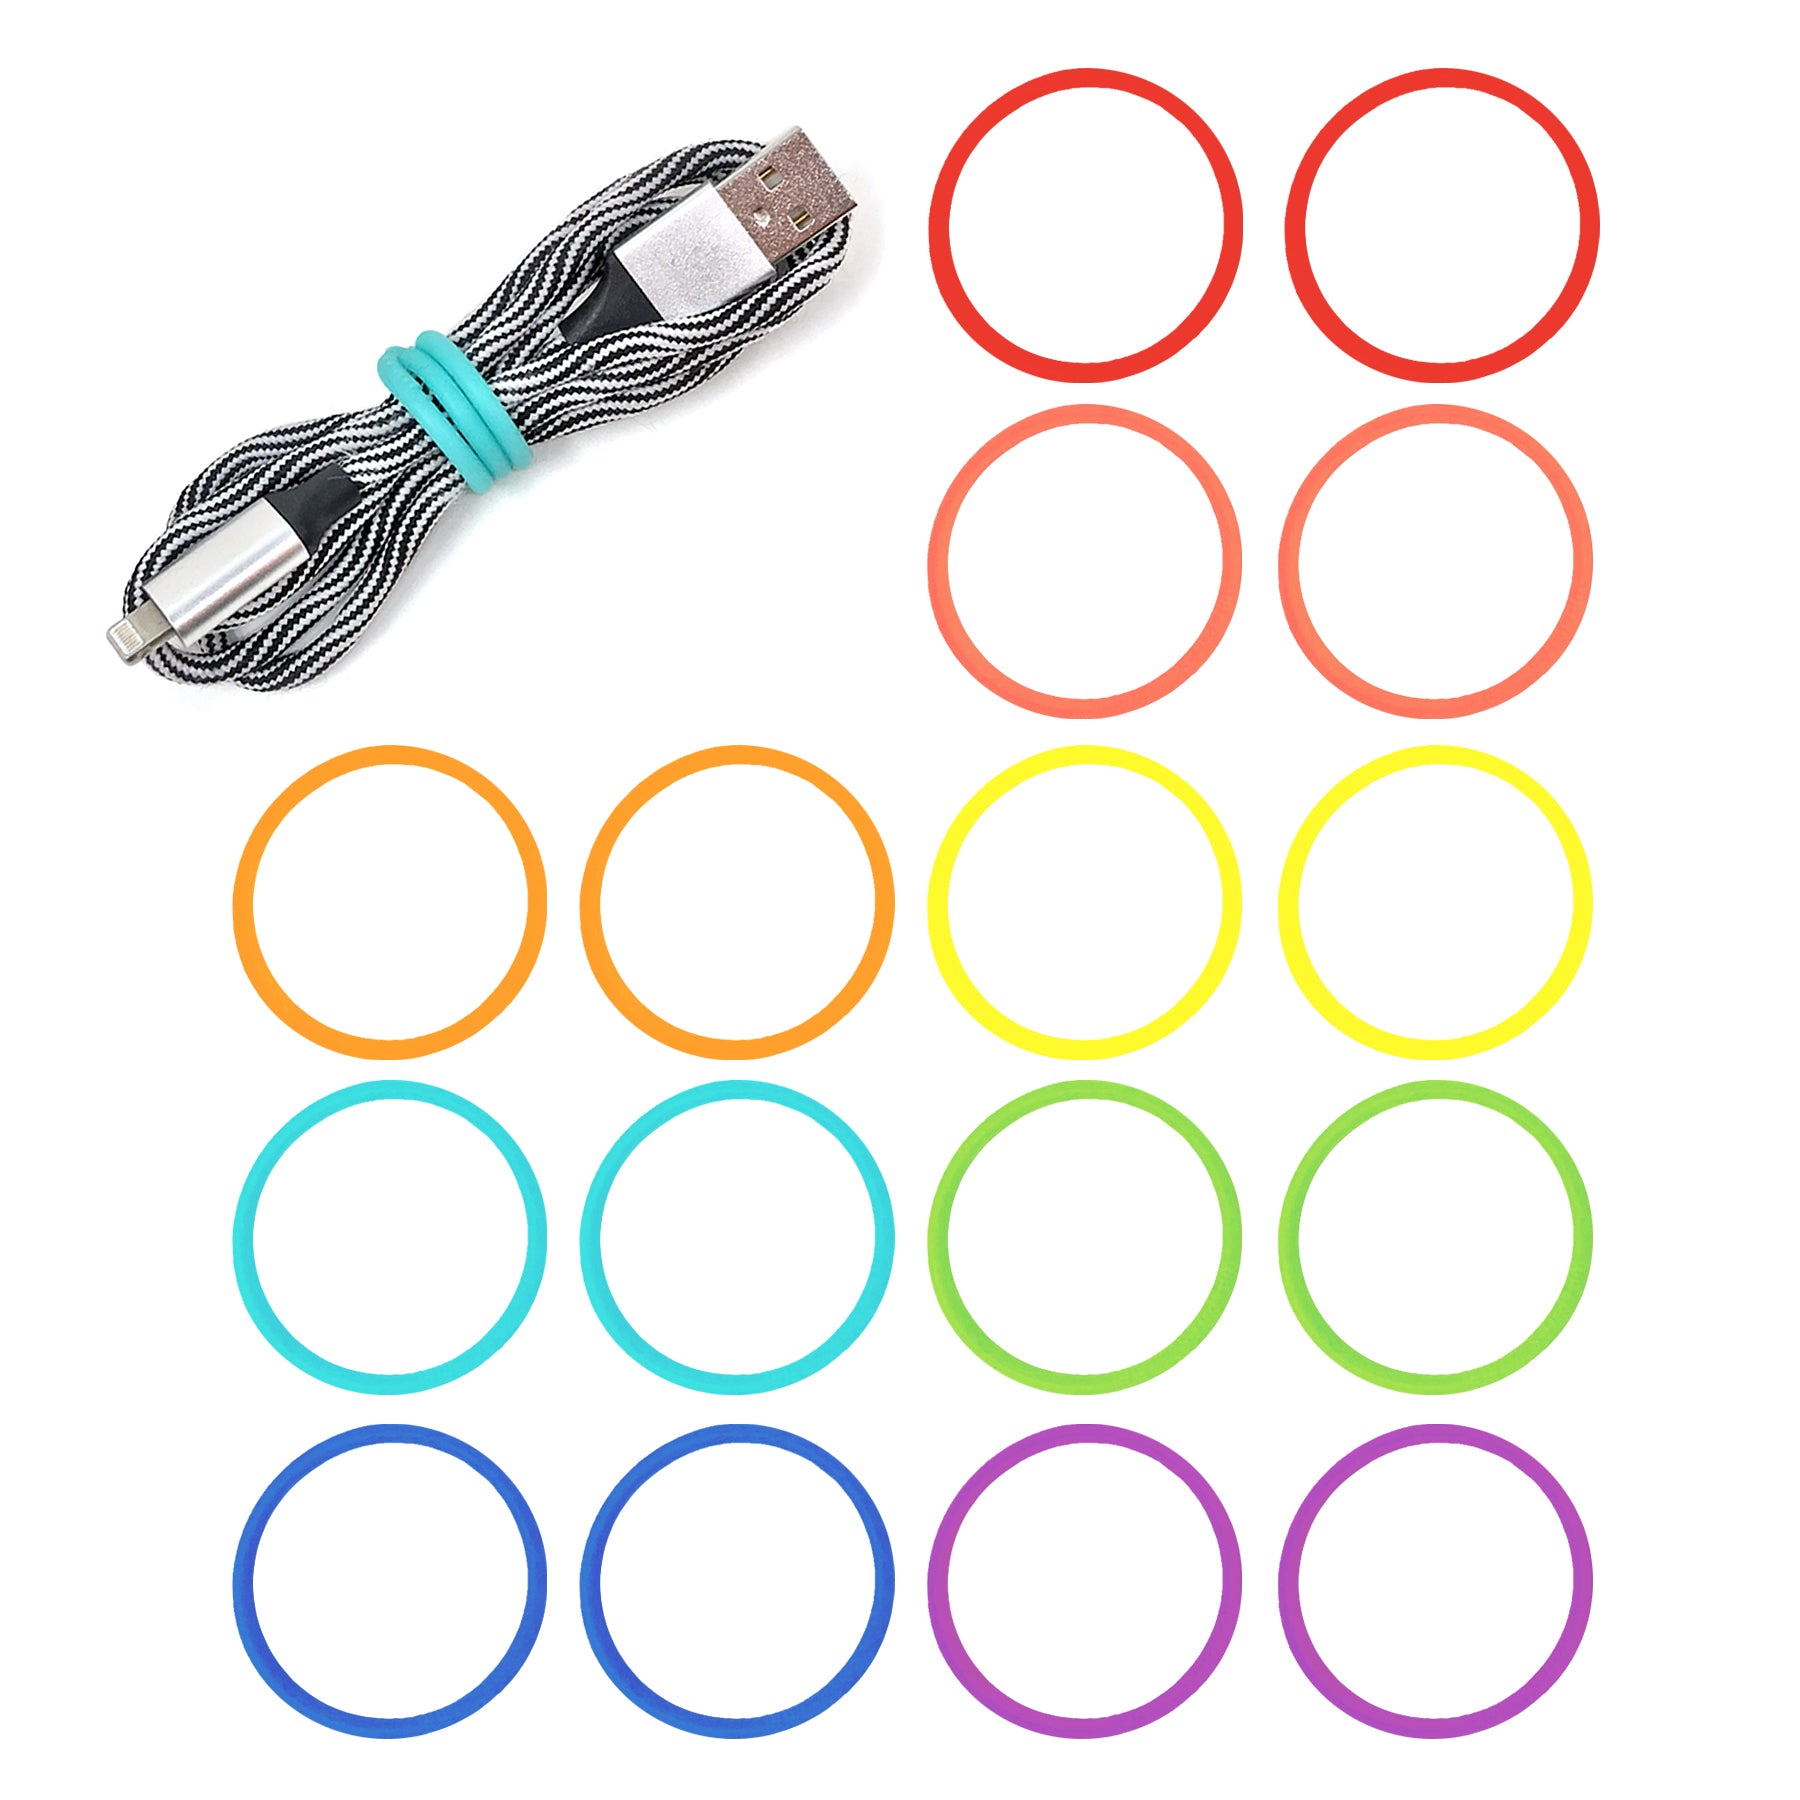 Super-Stretch Silicone Bands (16-Pack) - Wrap-It Storage